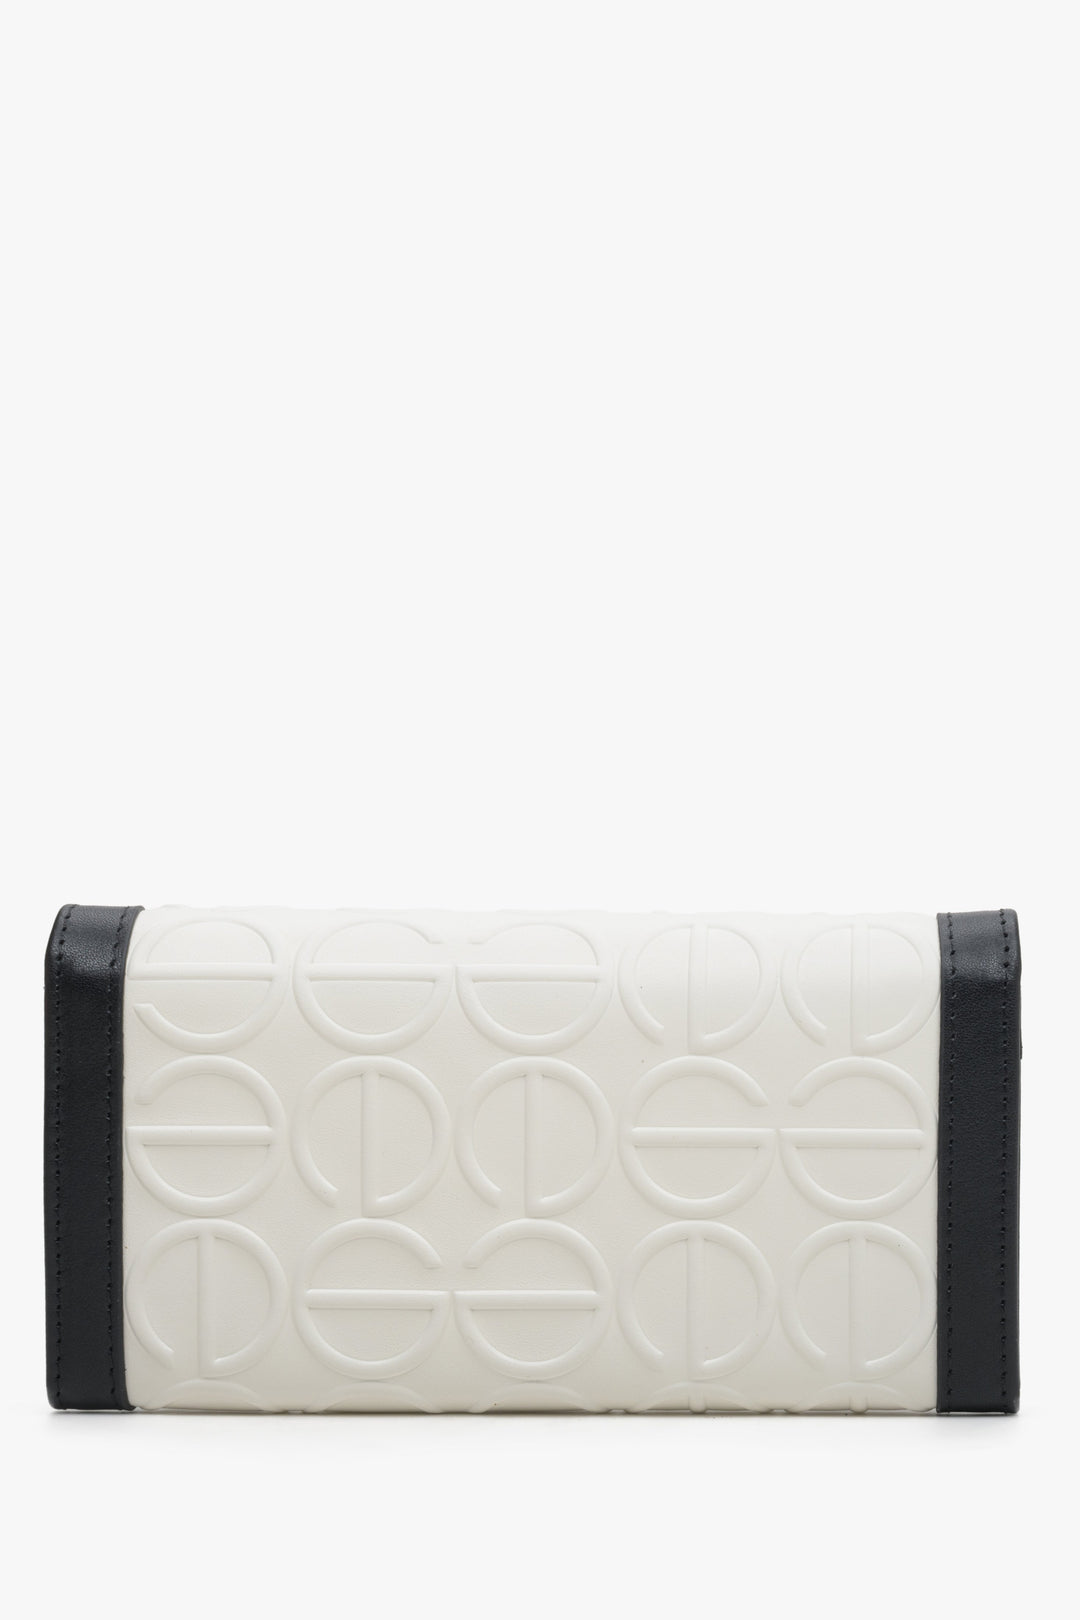 Leather, large women's black and white wallet by Estro - reverse side.